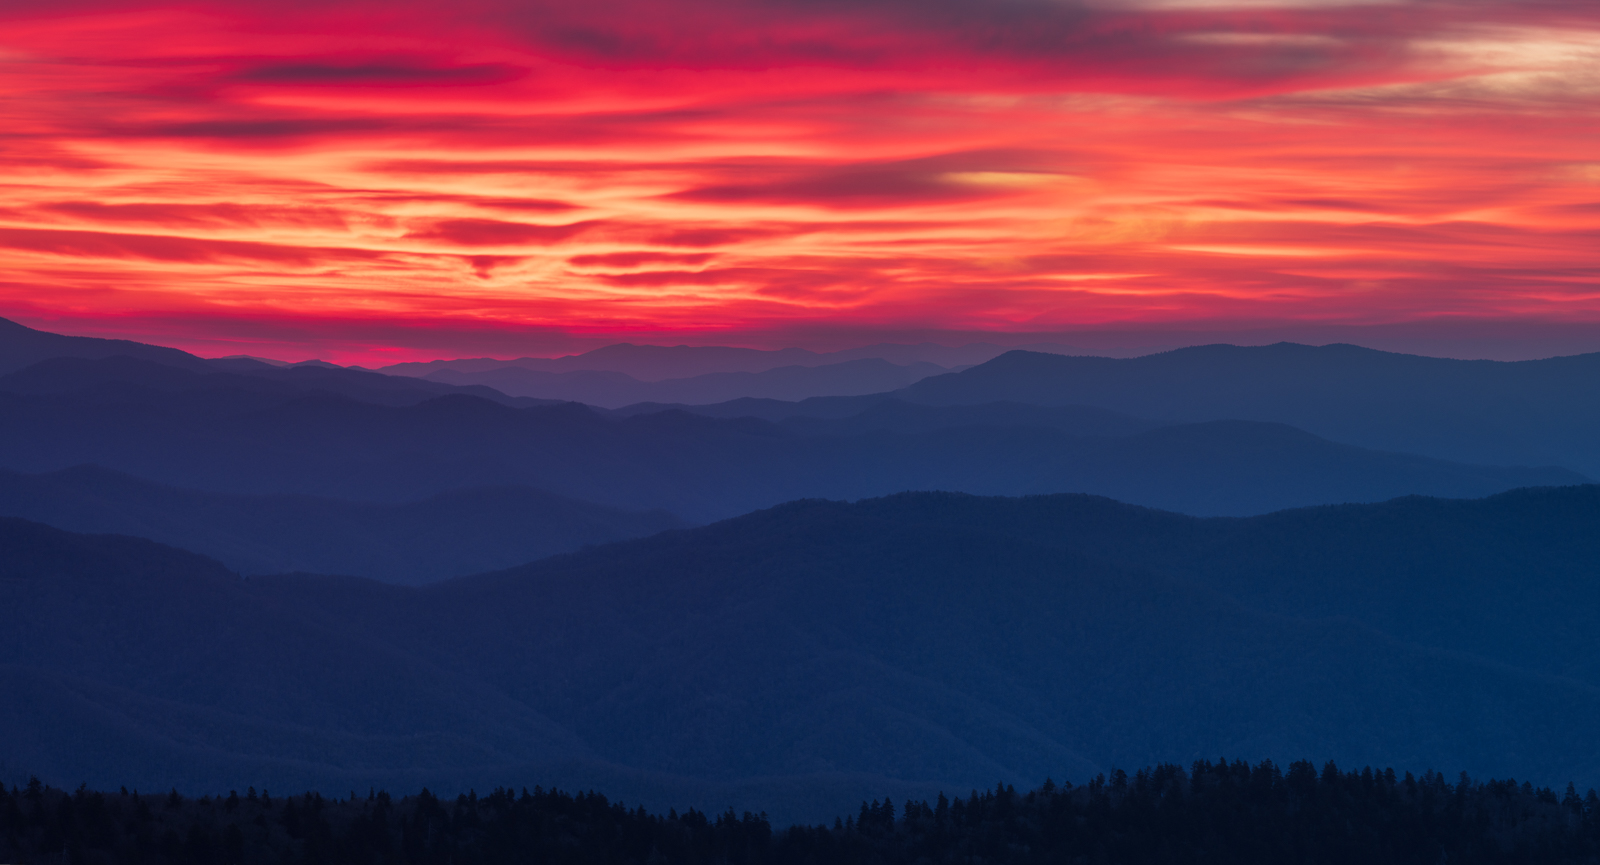 Sunrise over the Appalachian Moiuntains as seen from Clingmans Dome.